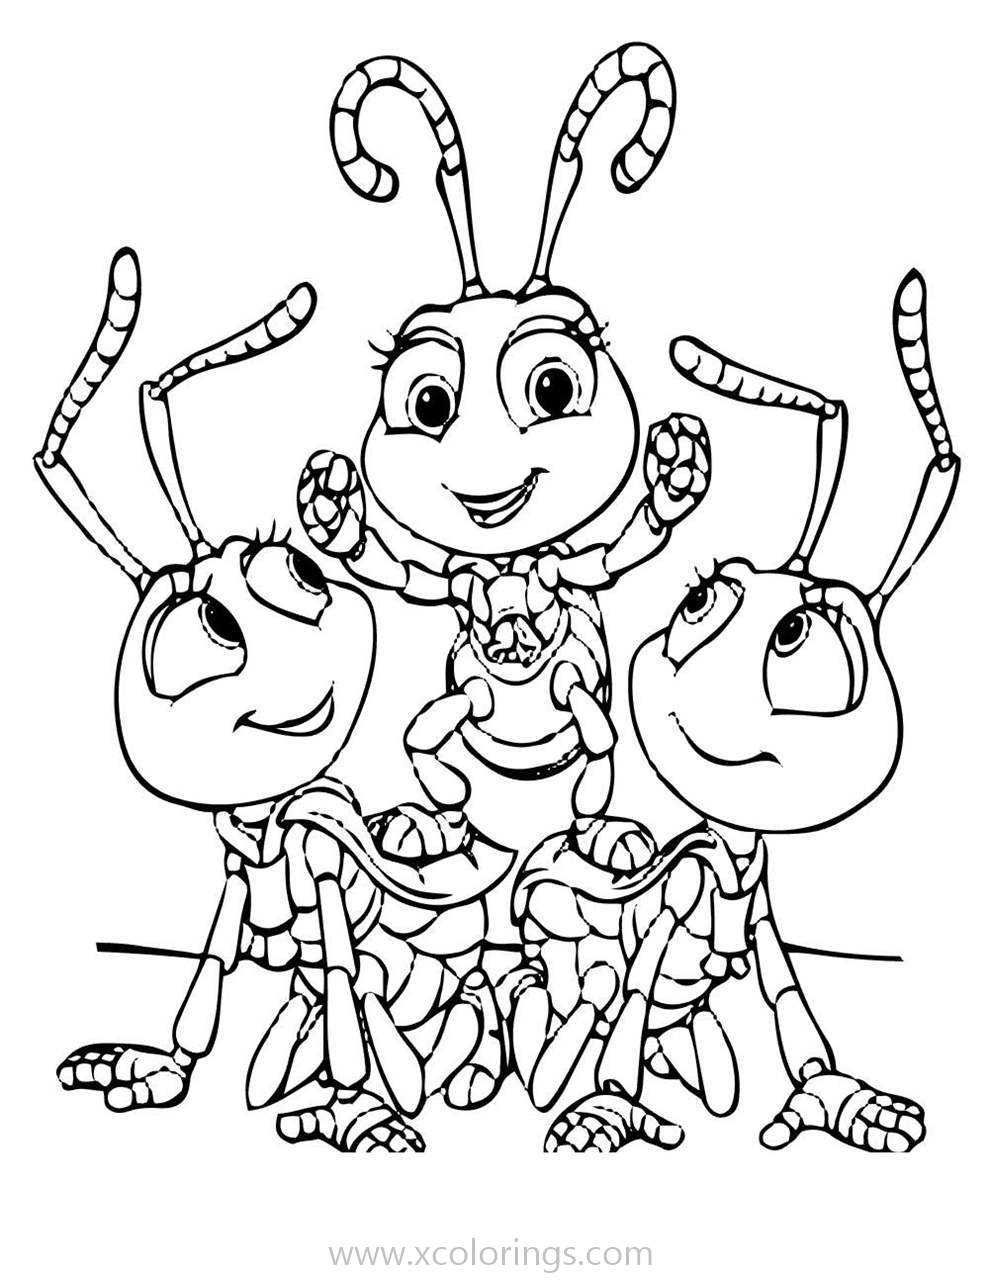 Free A Bugs Life Coloring Pages Dot And The Blueberries printable